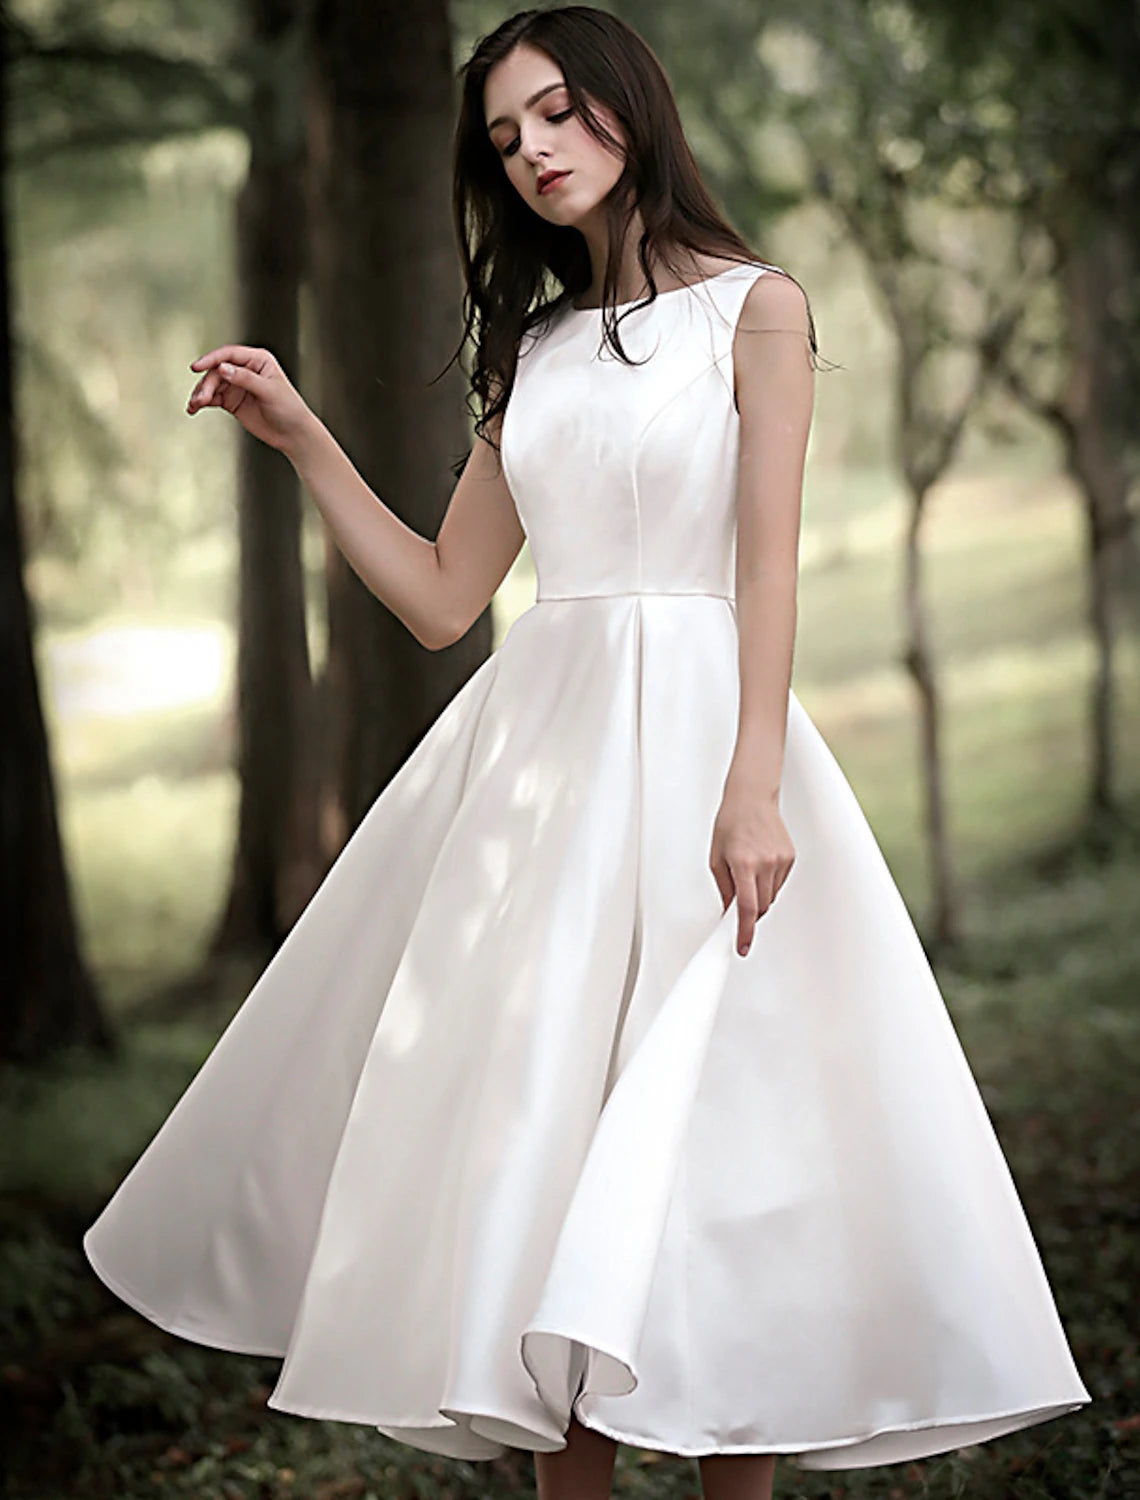 Reception Little White Dresses Wedding Dresses A-Line Scoop Neck Sleeveless Tea Length Satin Bridal Gowns With Solid Color